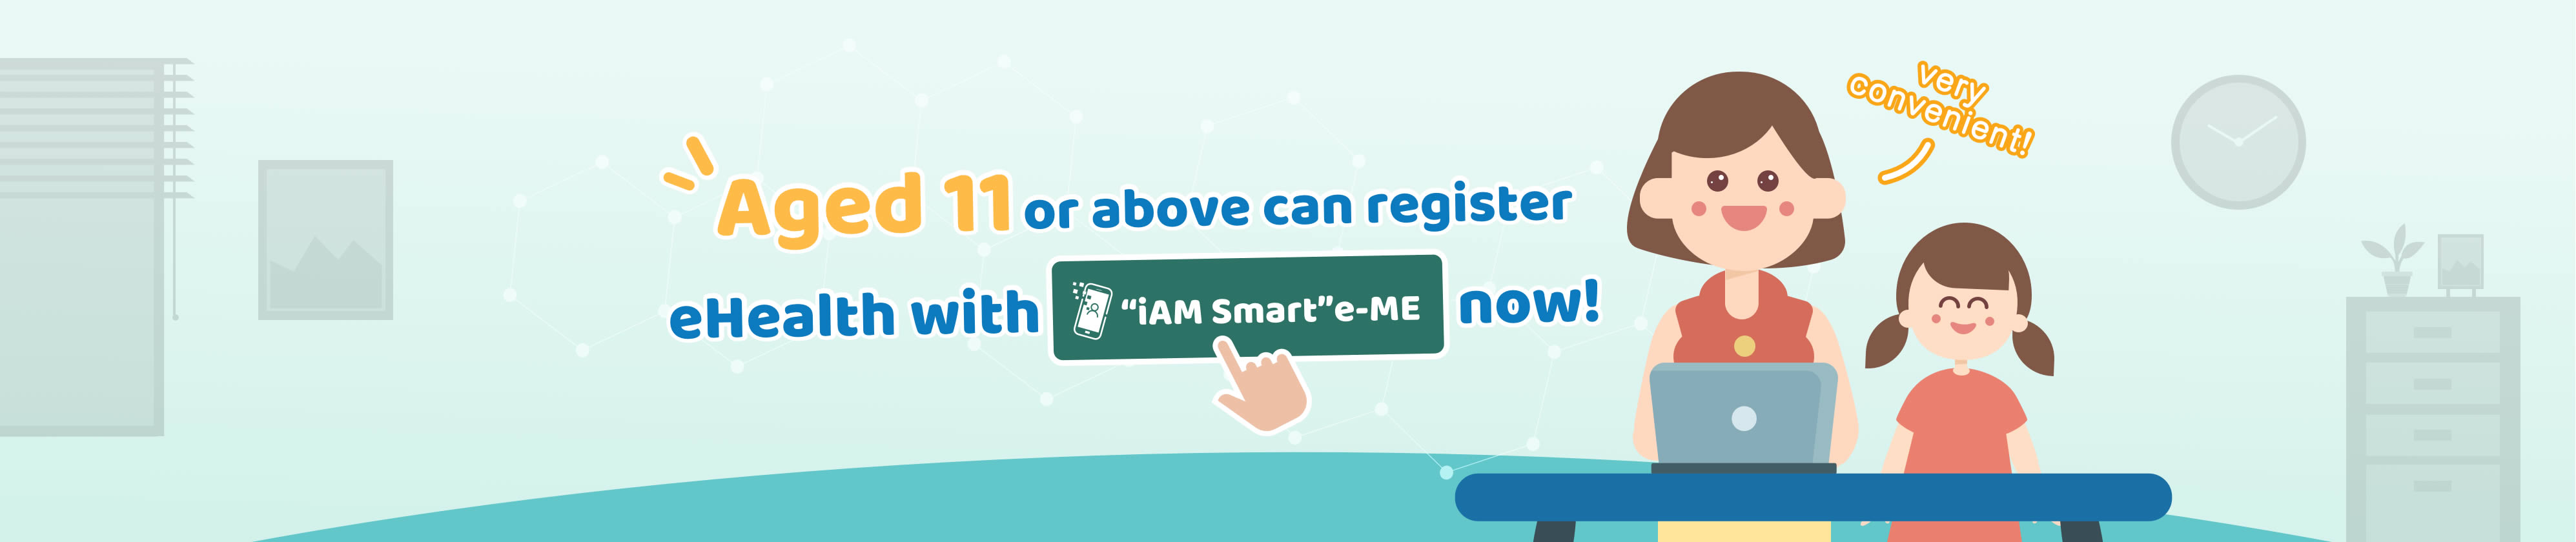 Aged 11 or above can register eHealth with ''iAM Smart'' e-ME now!